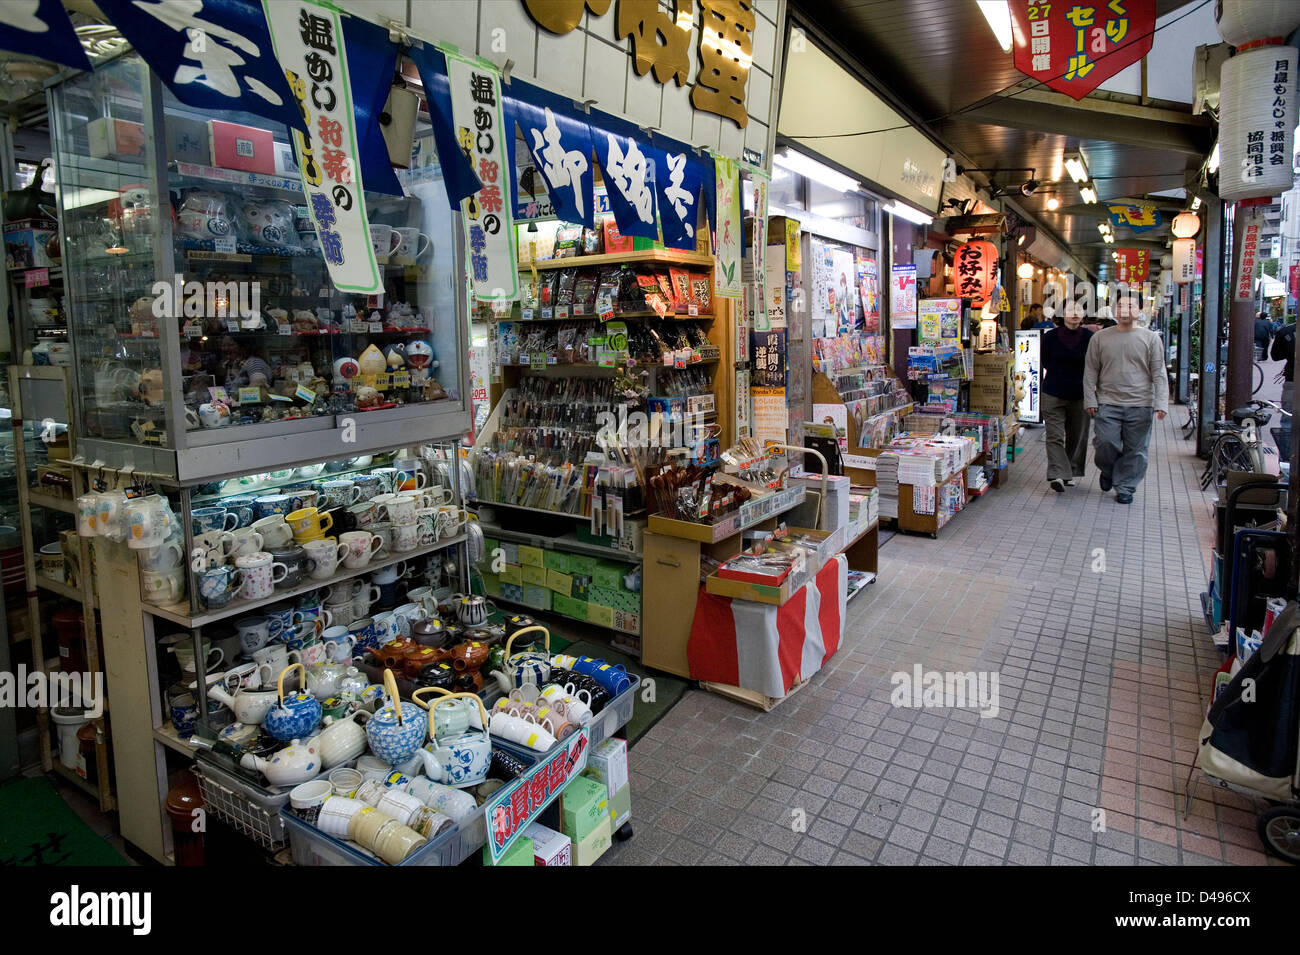 Goods spilling out onto a public sidewalk from shops in the Tsukishima district of Tokyo, Japan Stock Photo